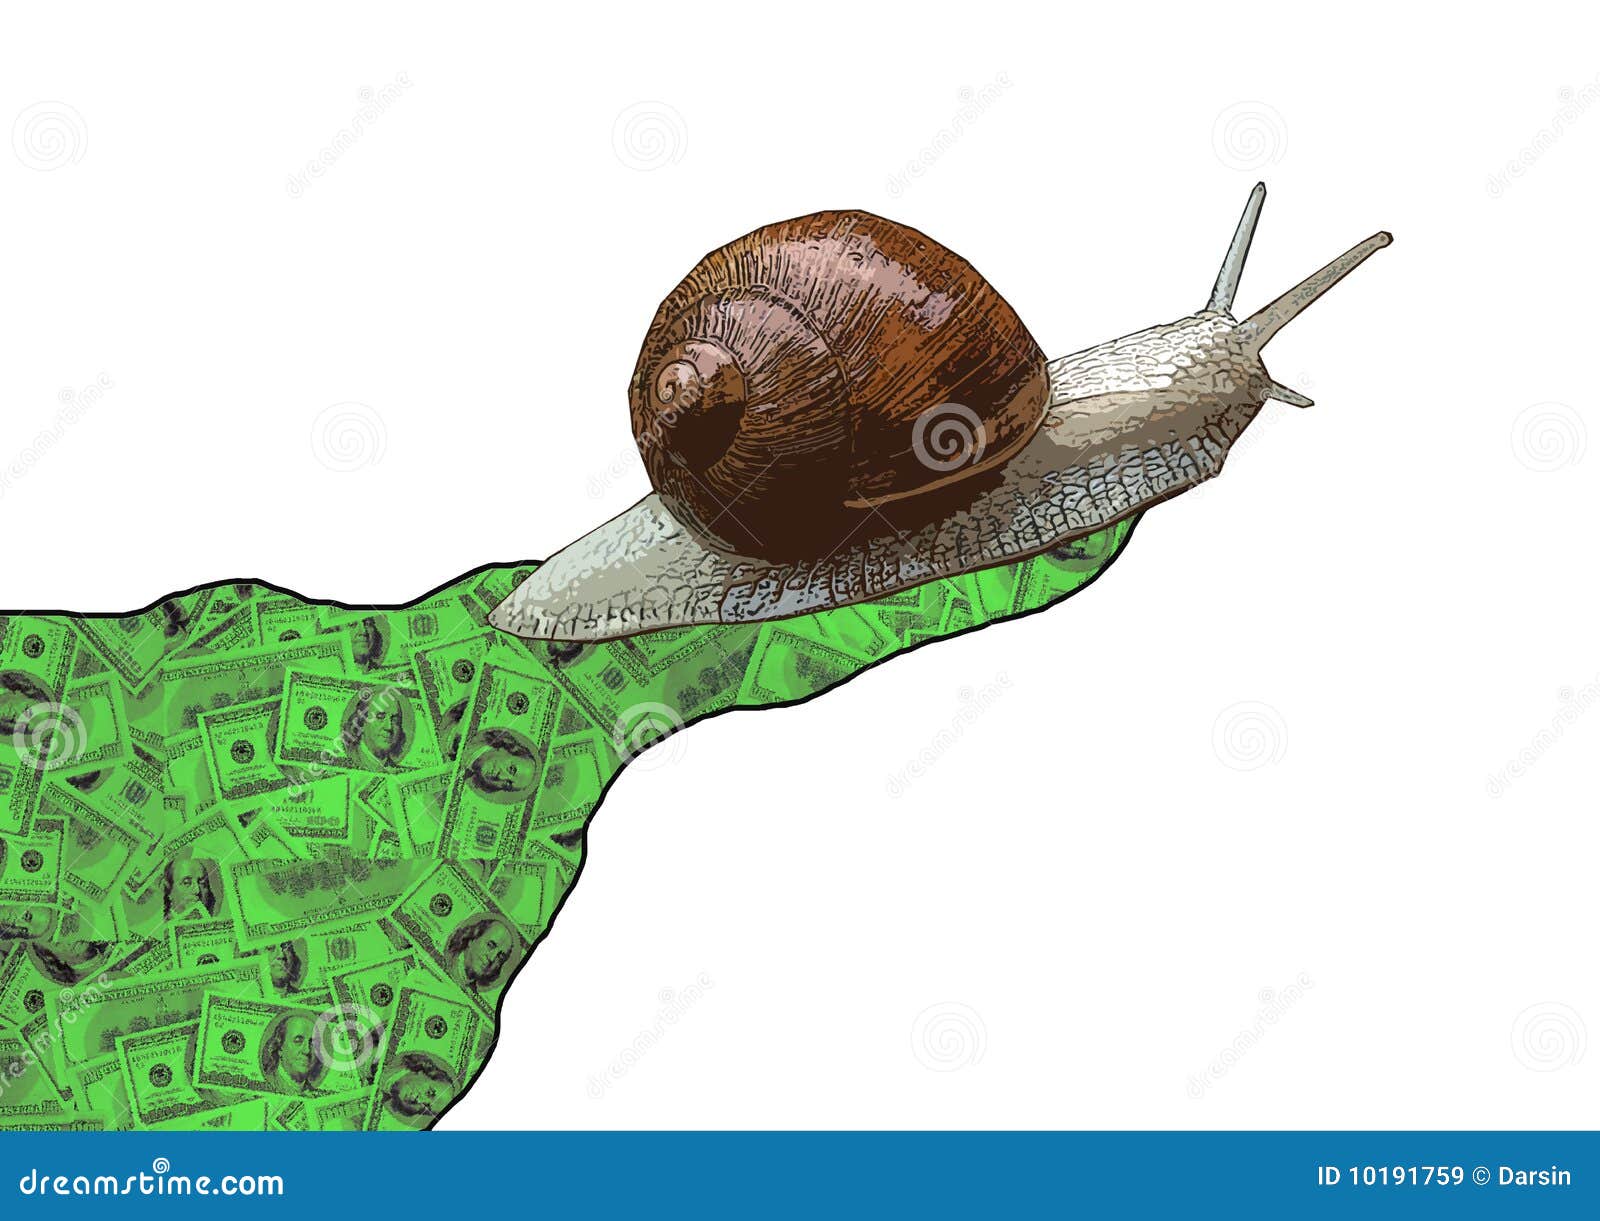 Snail s pace. A snail crawls slowly and leaves behind slimy money.